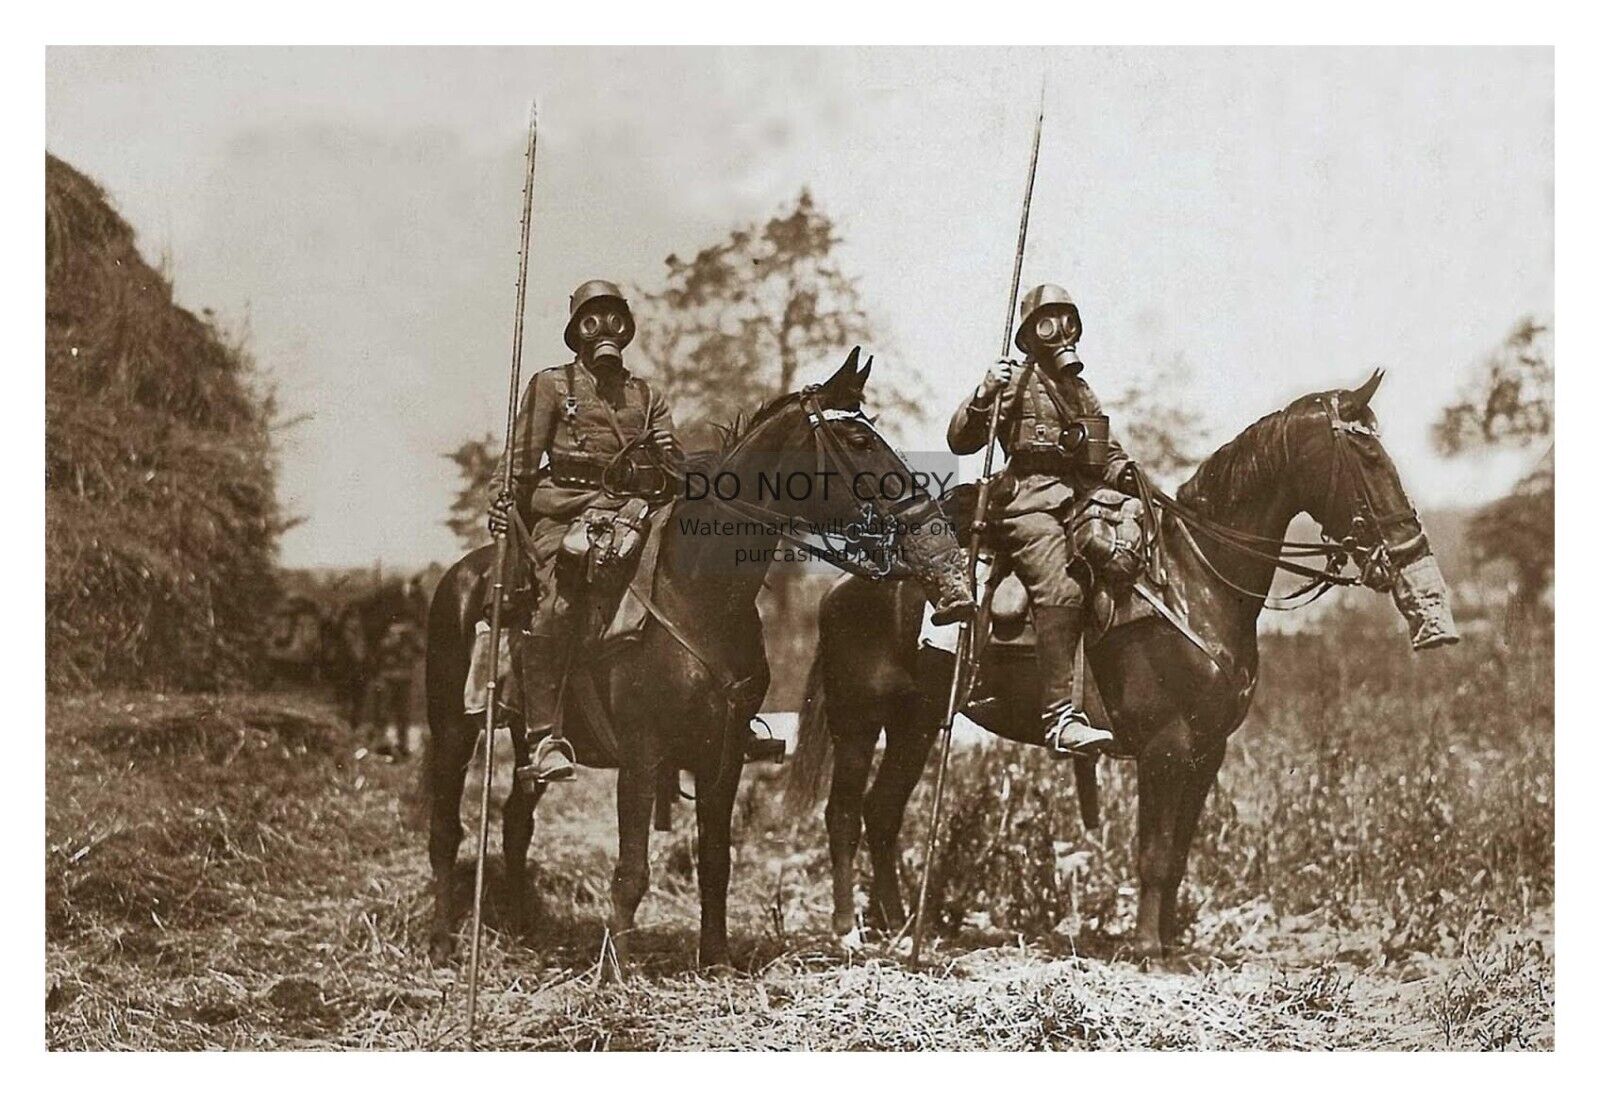 GERMAN CALVALRY SOLDIERS PATROLING WITH GAS MASKS AND LANCES WW1 4X6 PHOTO